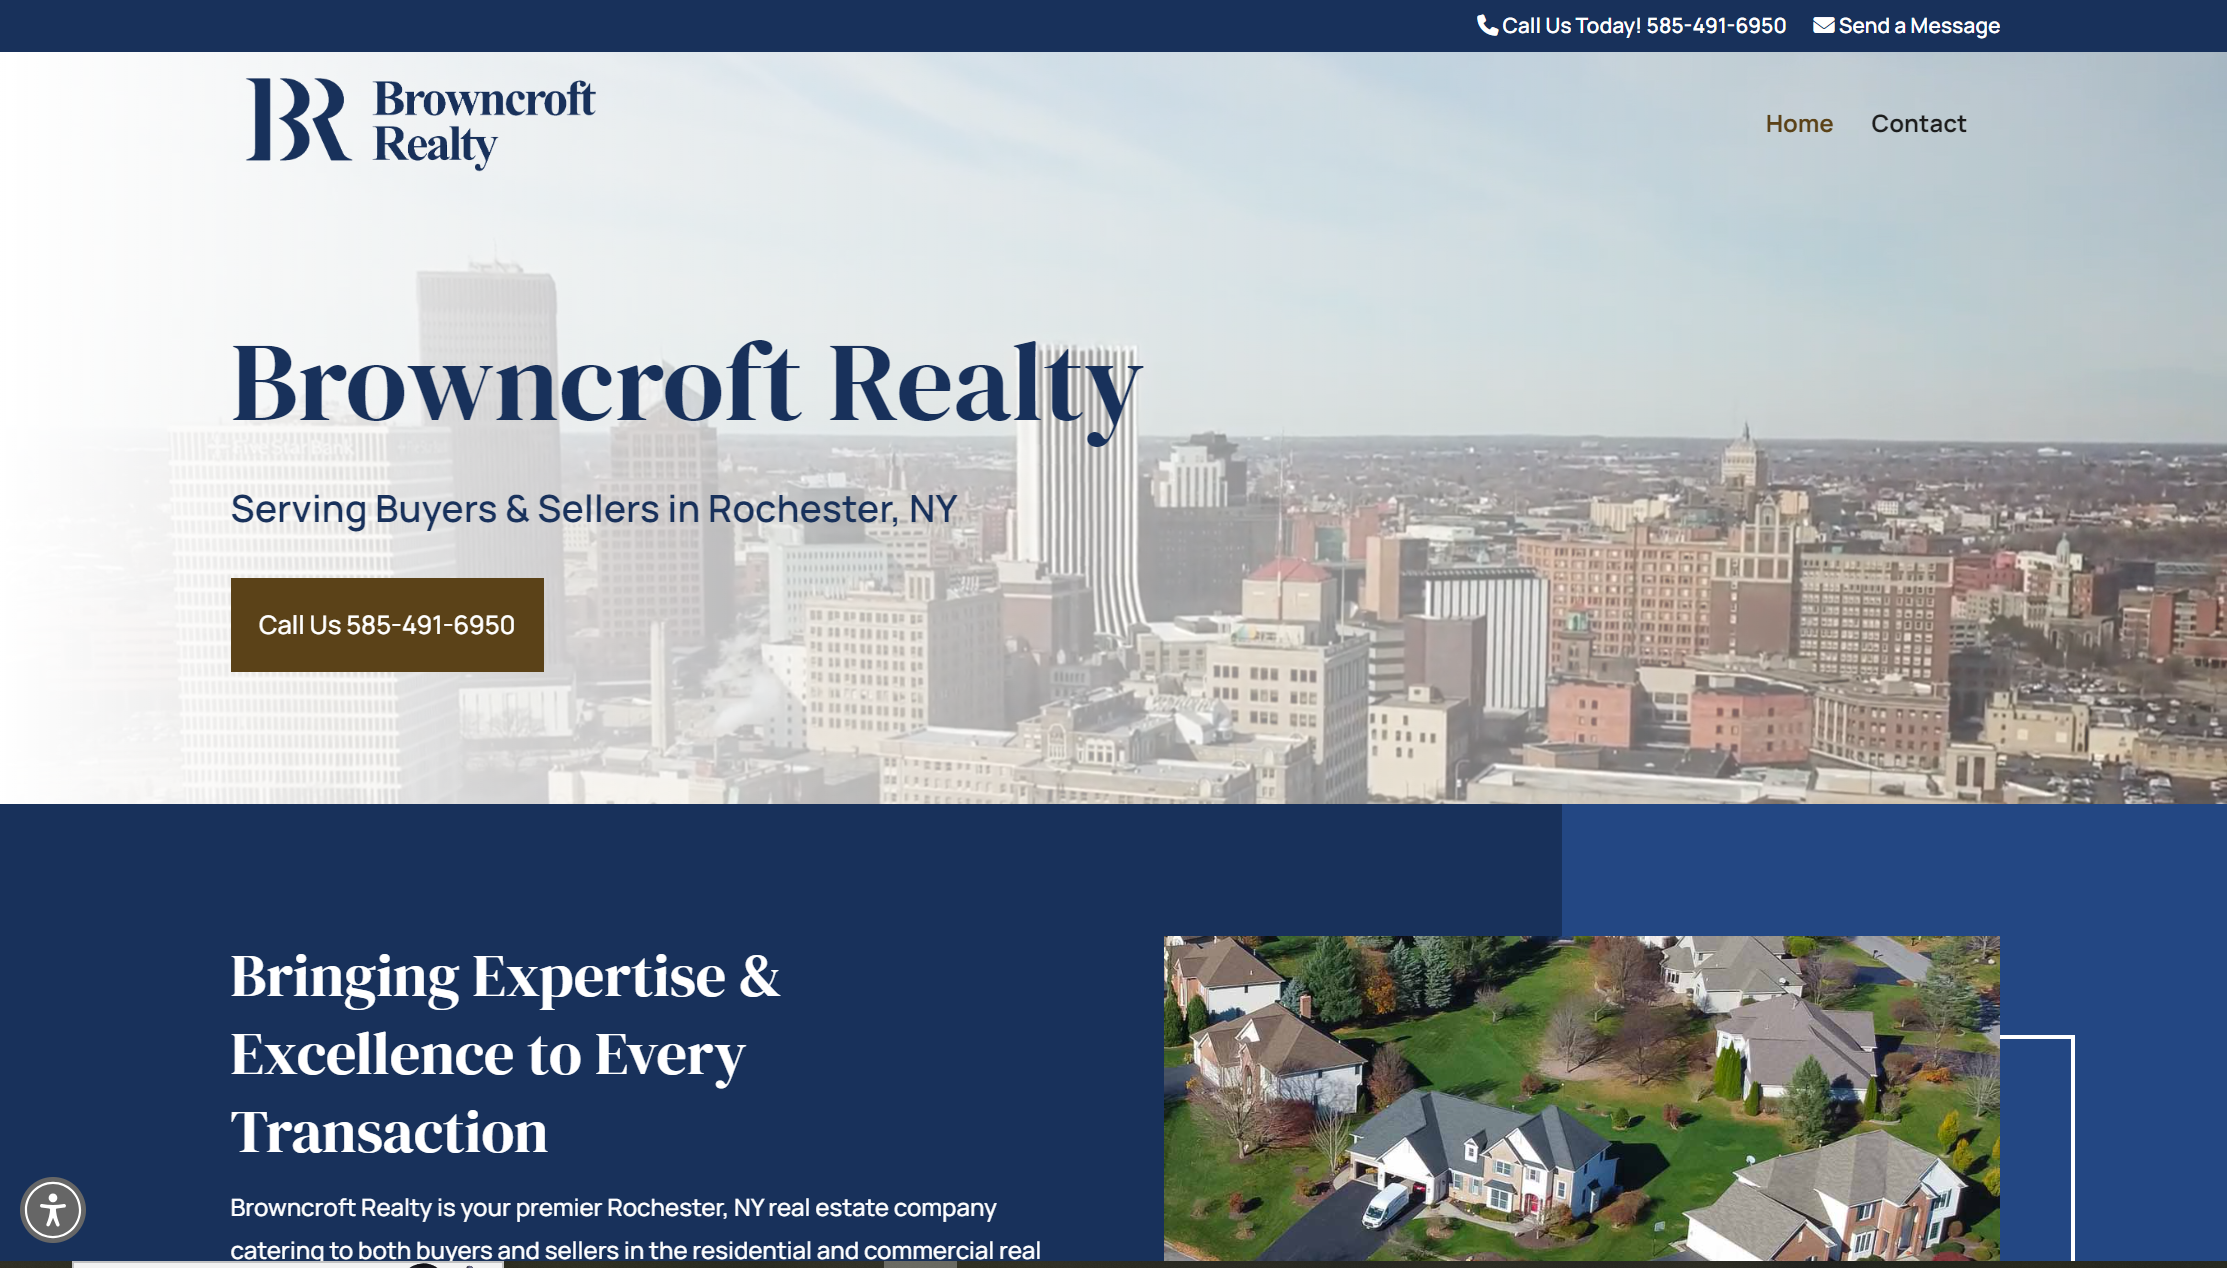 Browncroft Realty Group